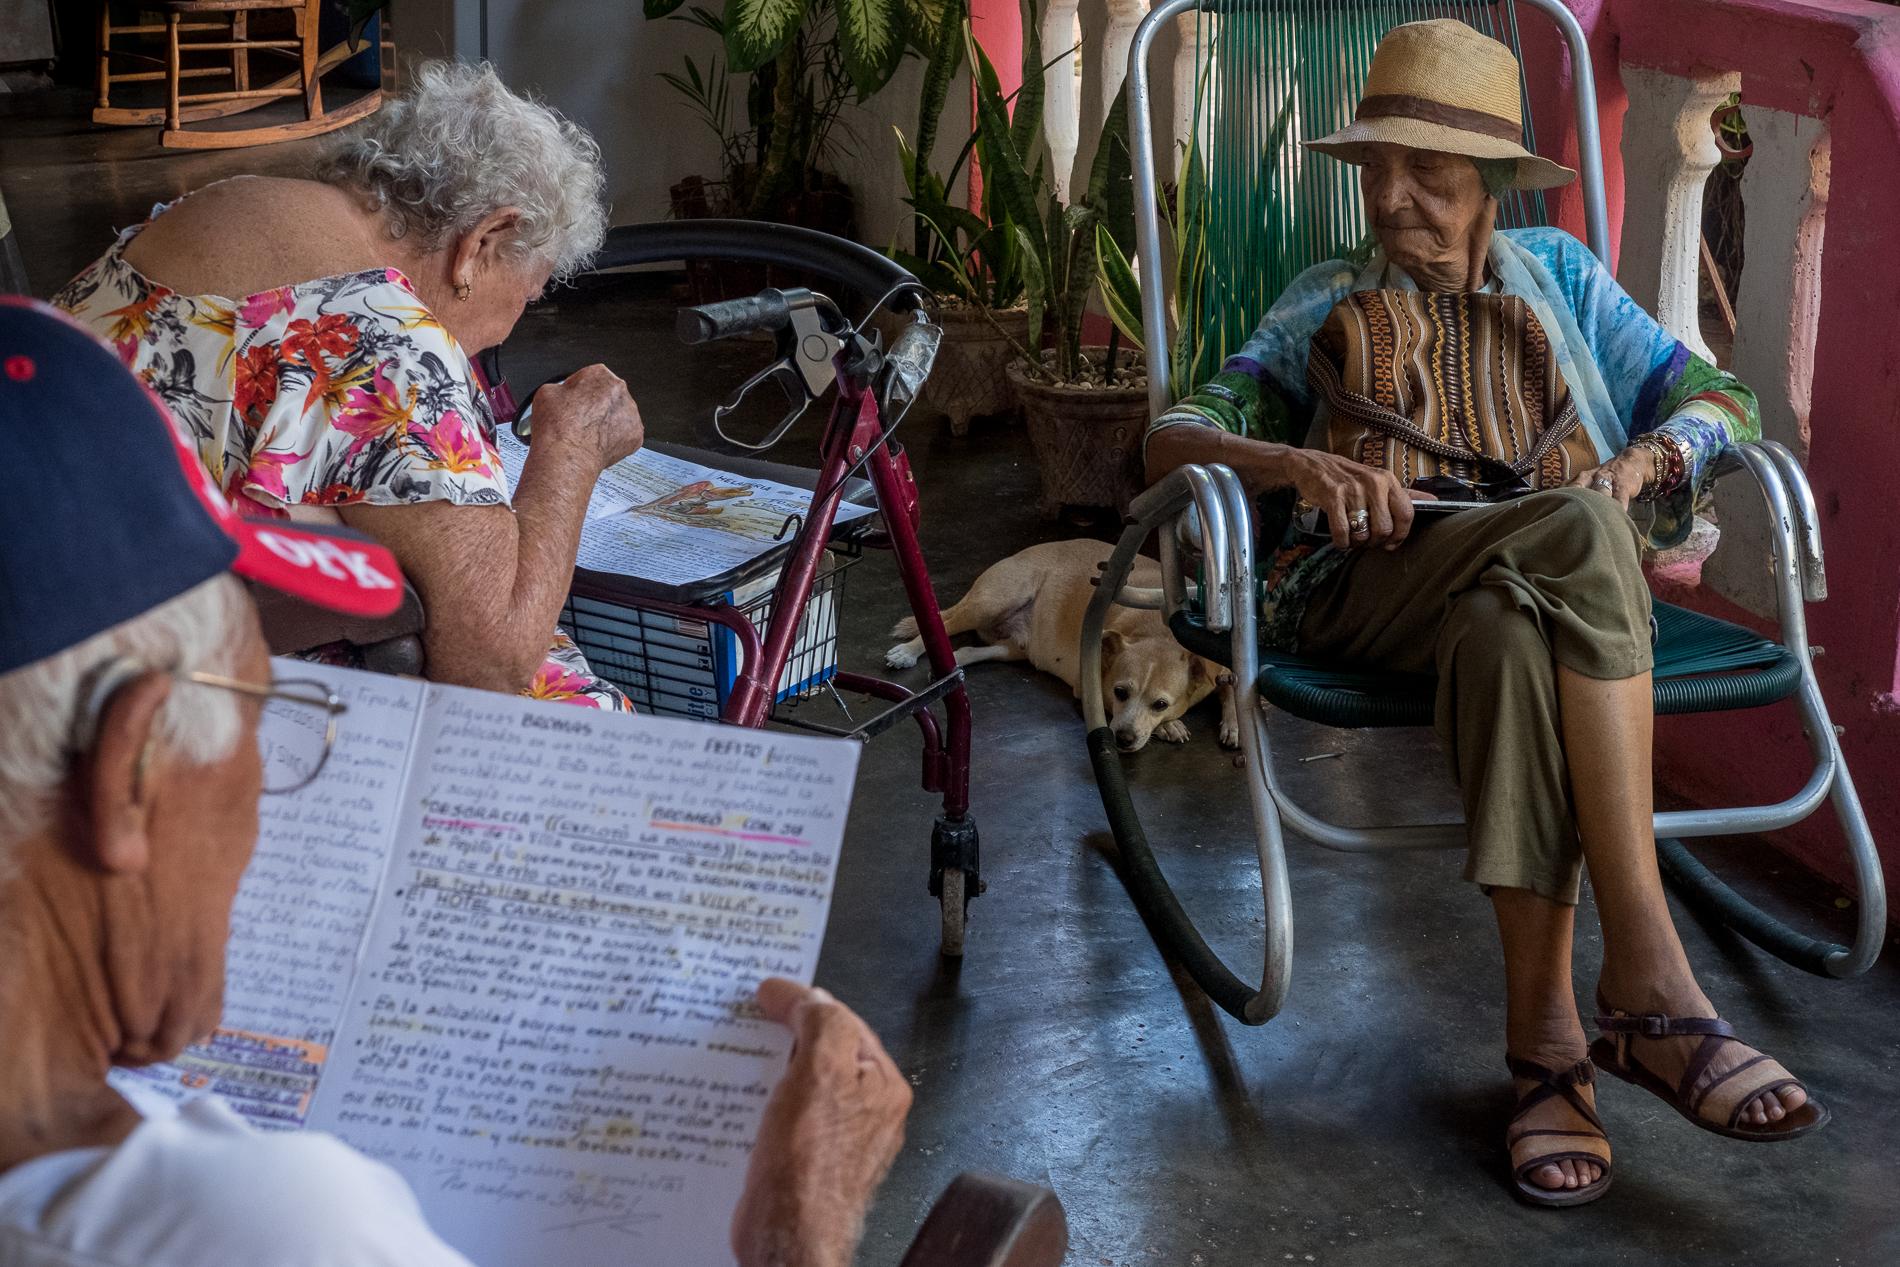 Cuba - Ten dollar pension - "Artists have no age. They are immortal." jokes...